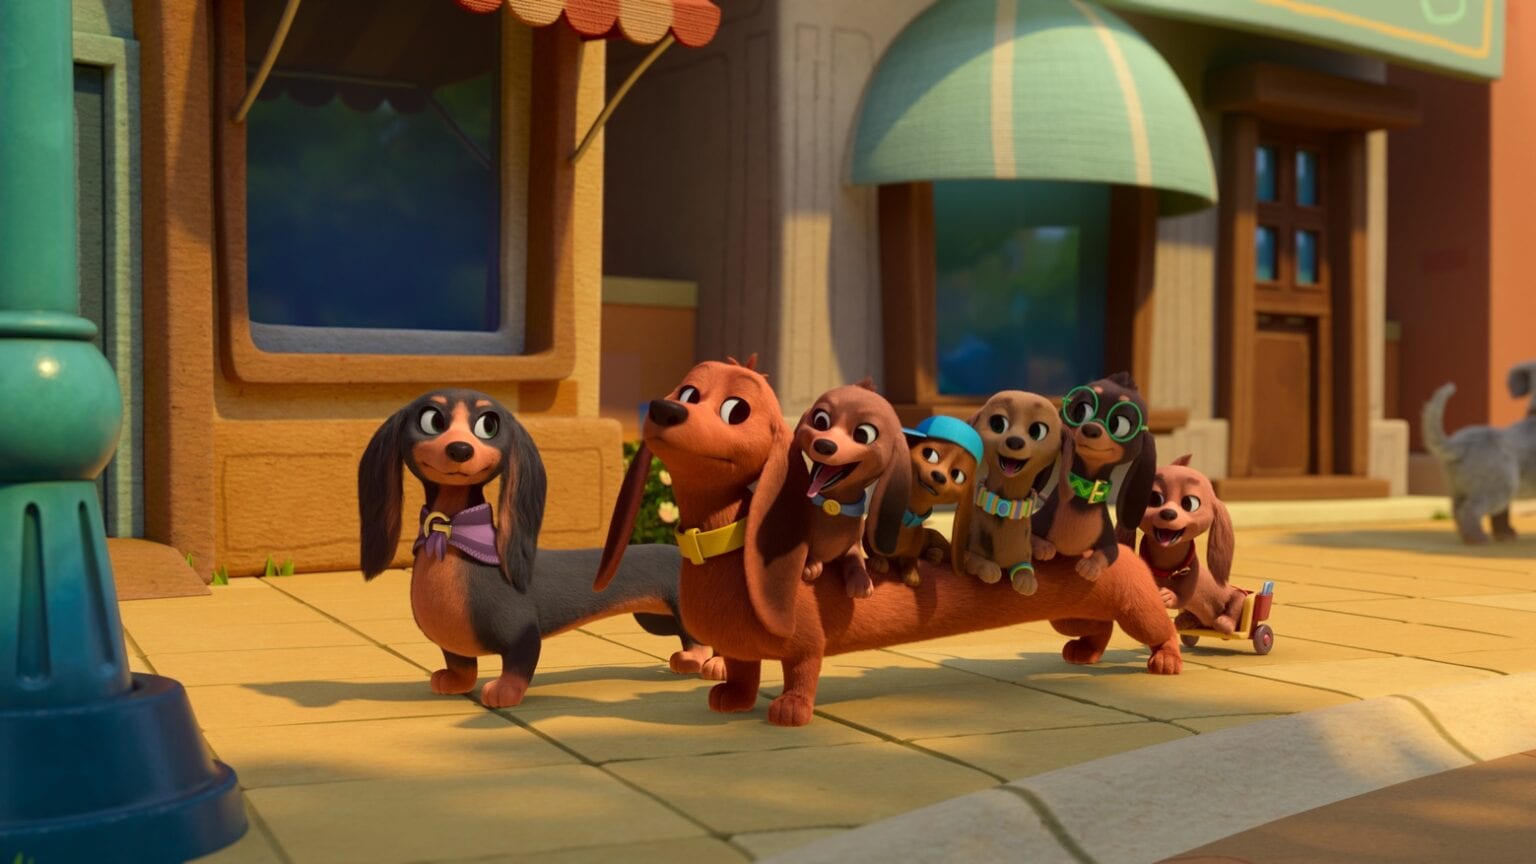 Dachshunds get their time to shine in ‘Pretzel and the Puppies’ on Apple TV+